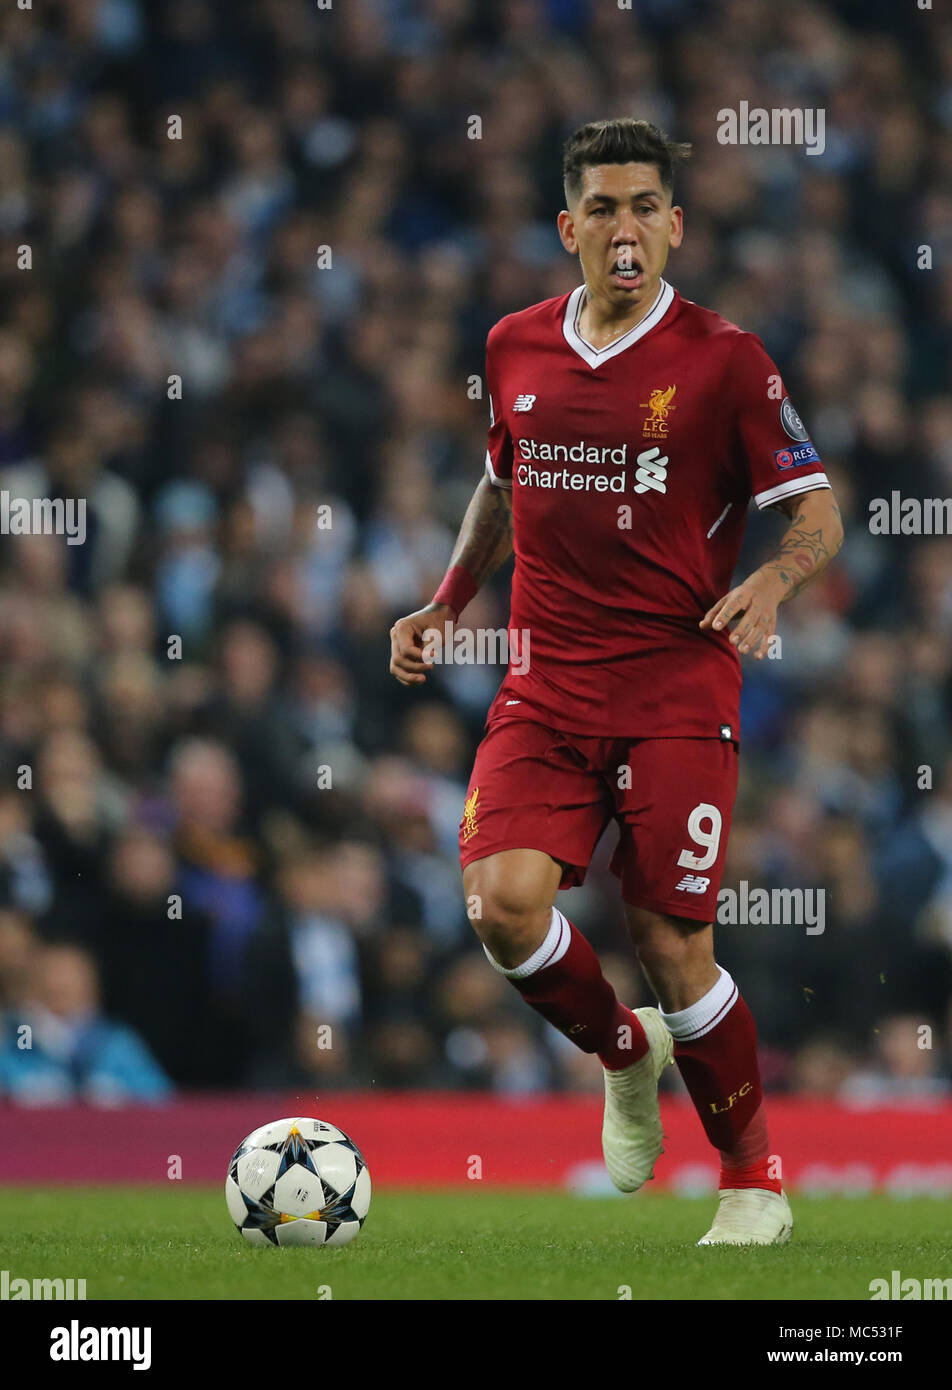 MANCHESTER, ENGLAND - APRIL 10: Roberto Firmino of Liverpool during the Champions League quarter final second leg match between Manchester City and Liverpool at the Etihad Stadium on April 10, 2018 in Manchester, United Kingdom. Stock Photo